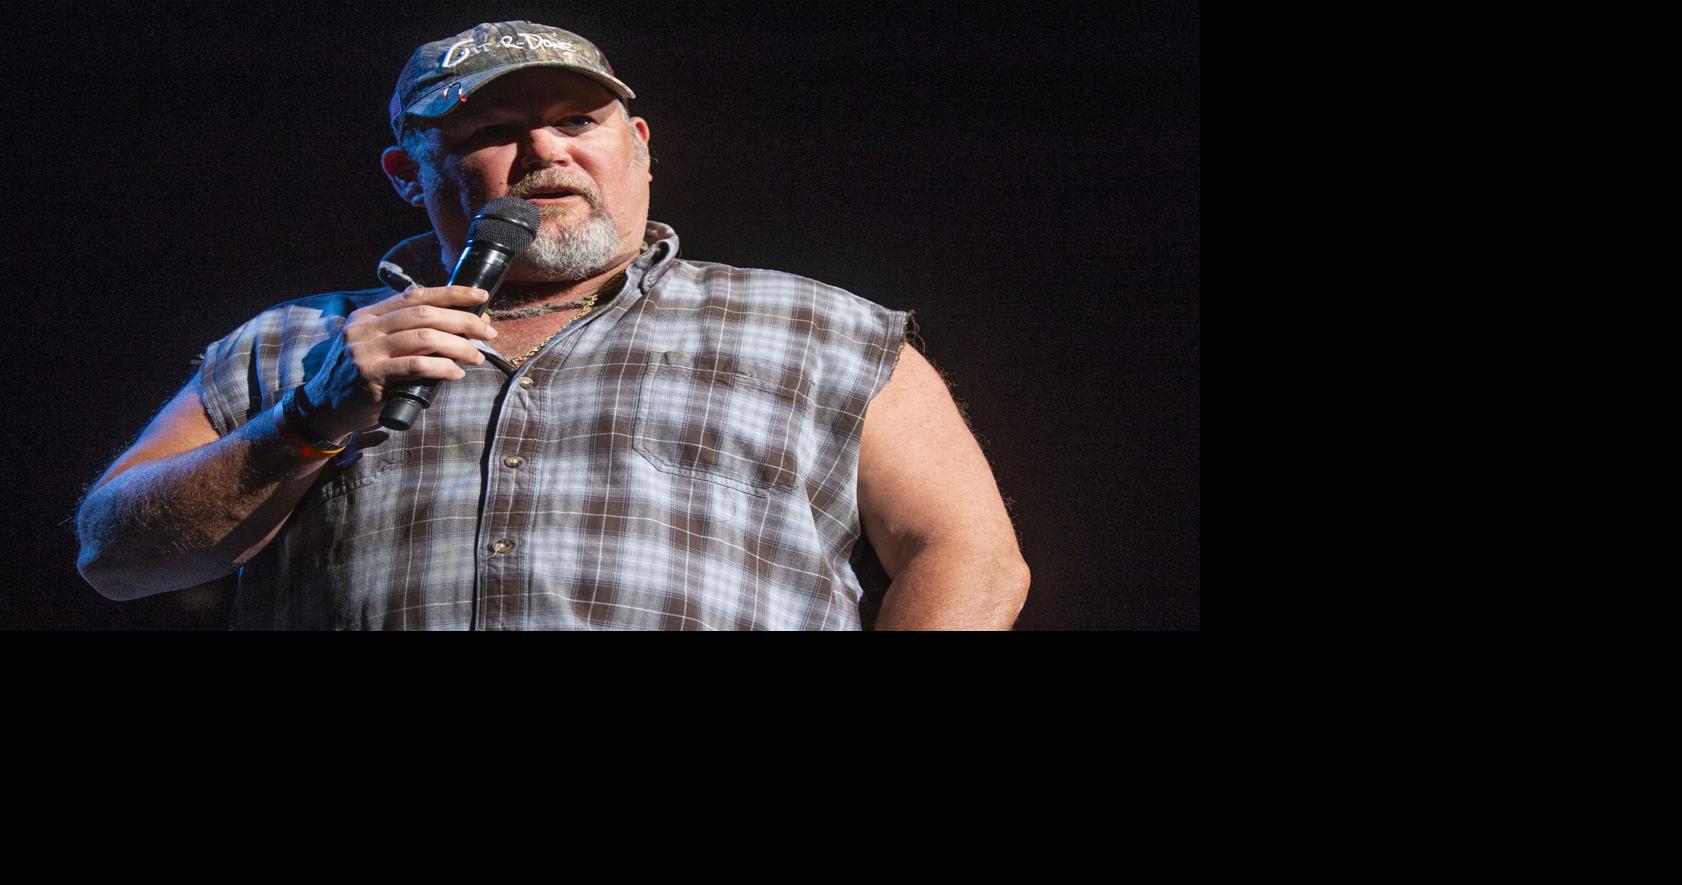 Larry the Cable Guy continues comic success story